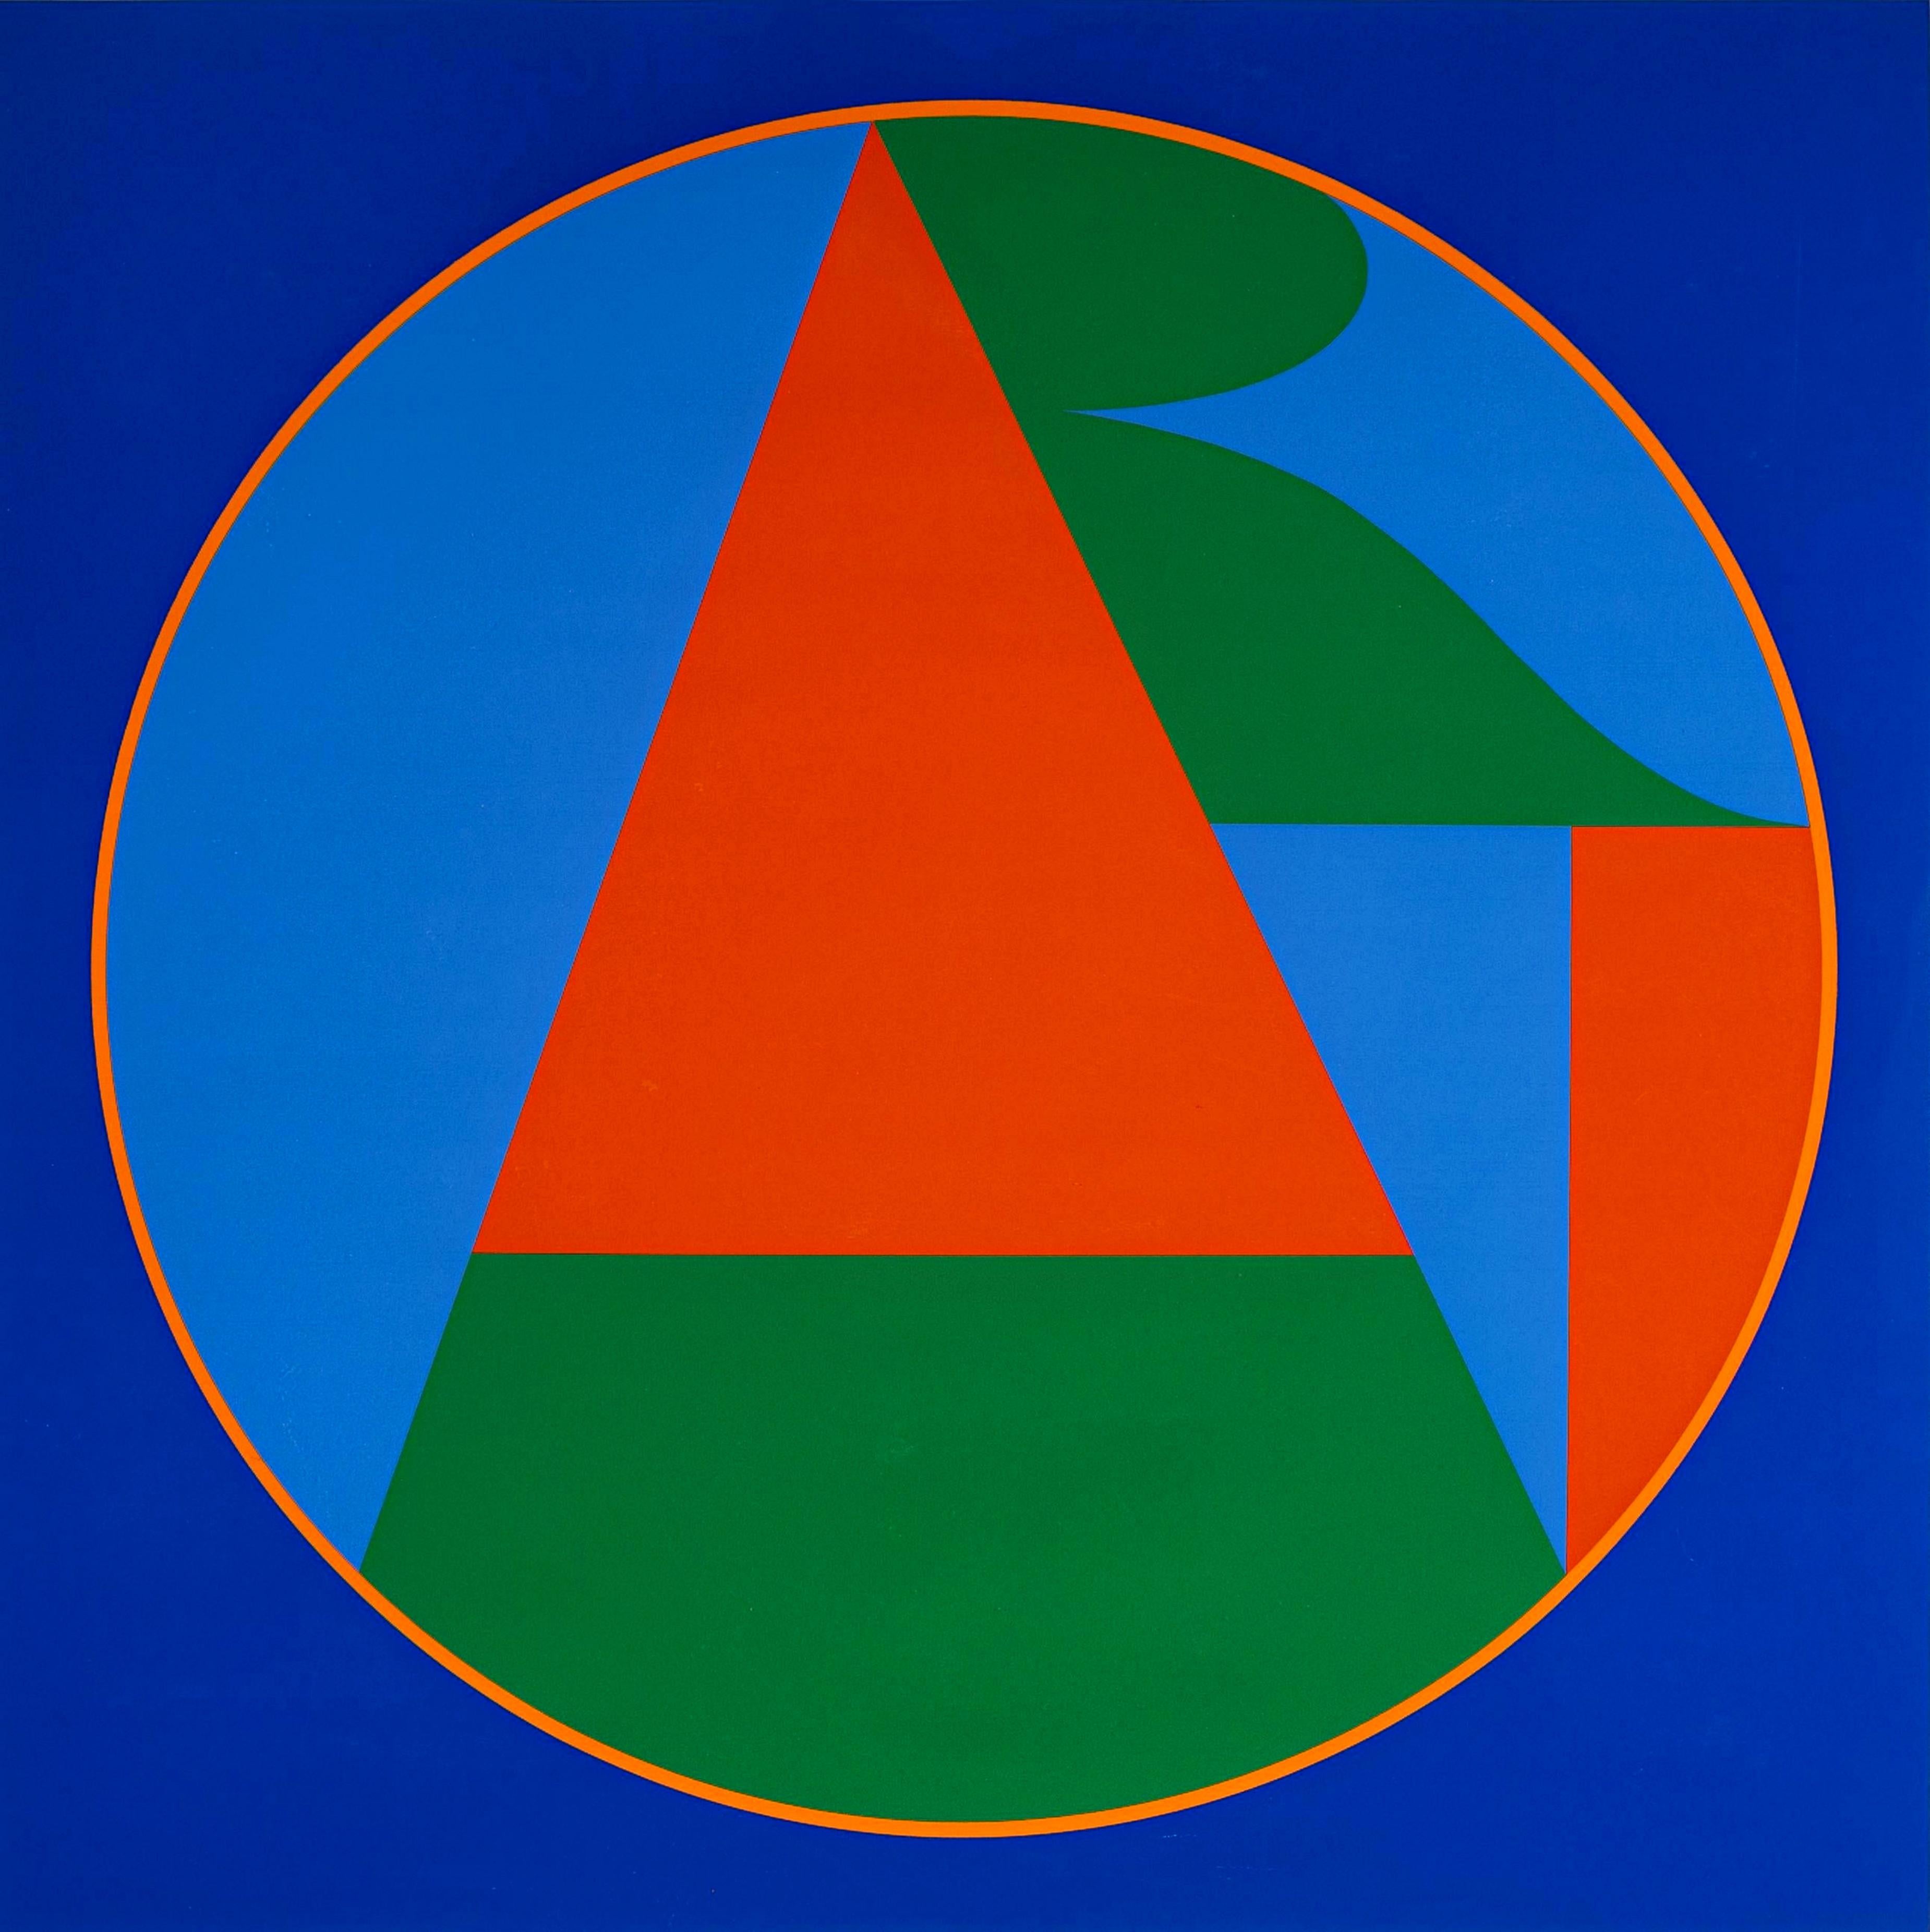 ART (Sheehan, 80) iconic 1970s geometric abstraction lt ed s/n for Colby College - Print by Robert Indiana